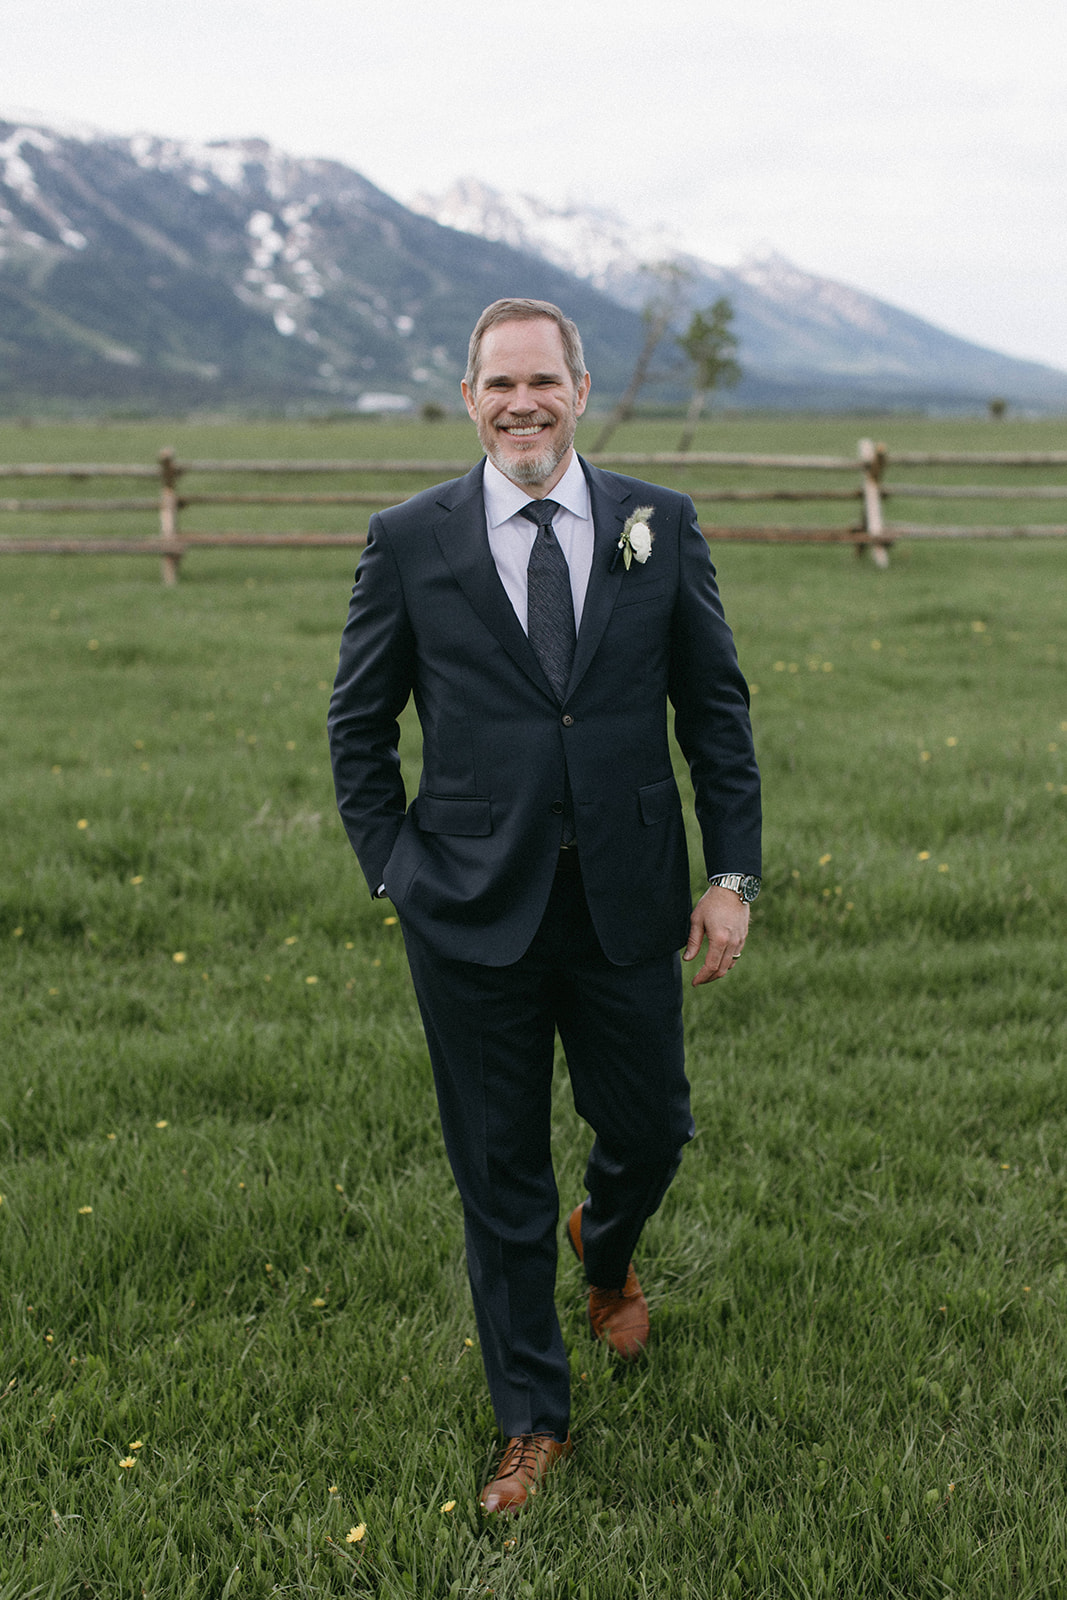 A timeless wedding portrait of a groom dressed in a black tailored suit adorned with a white boutonniere on his lapel.